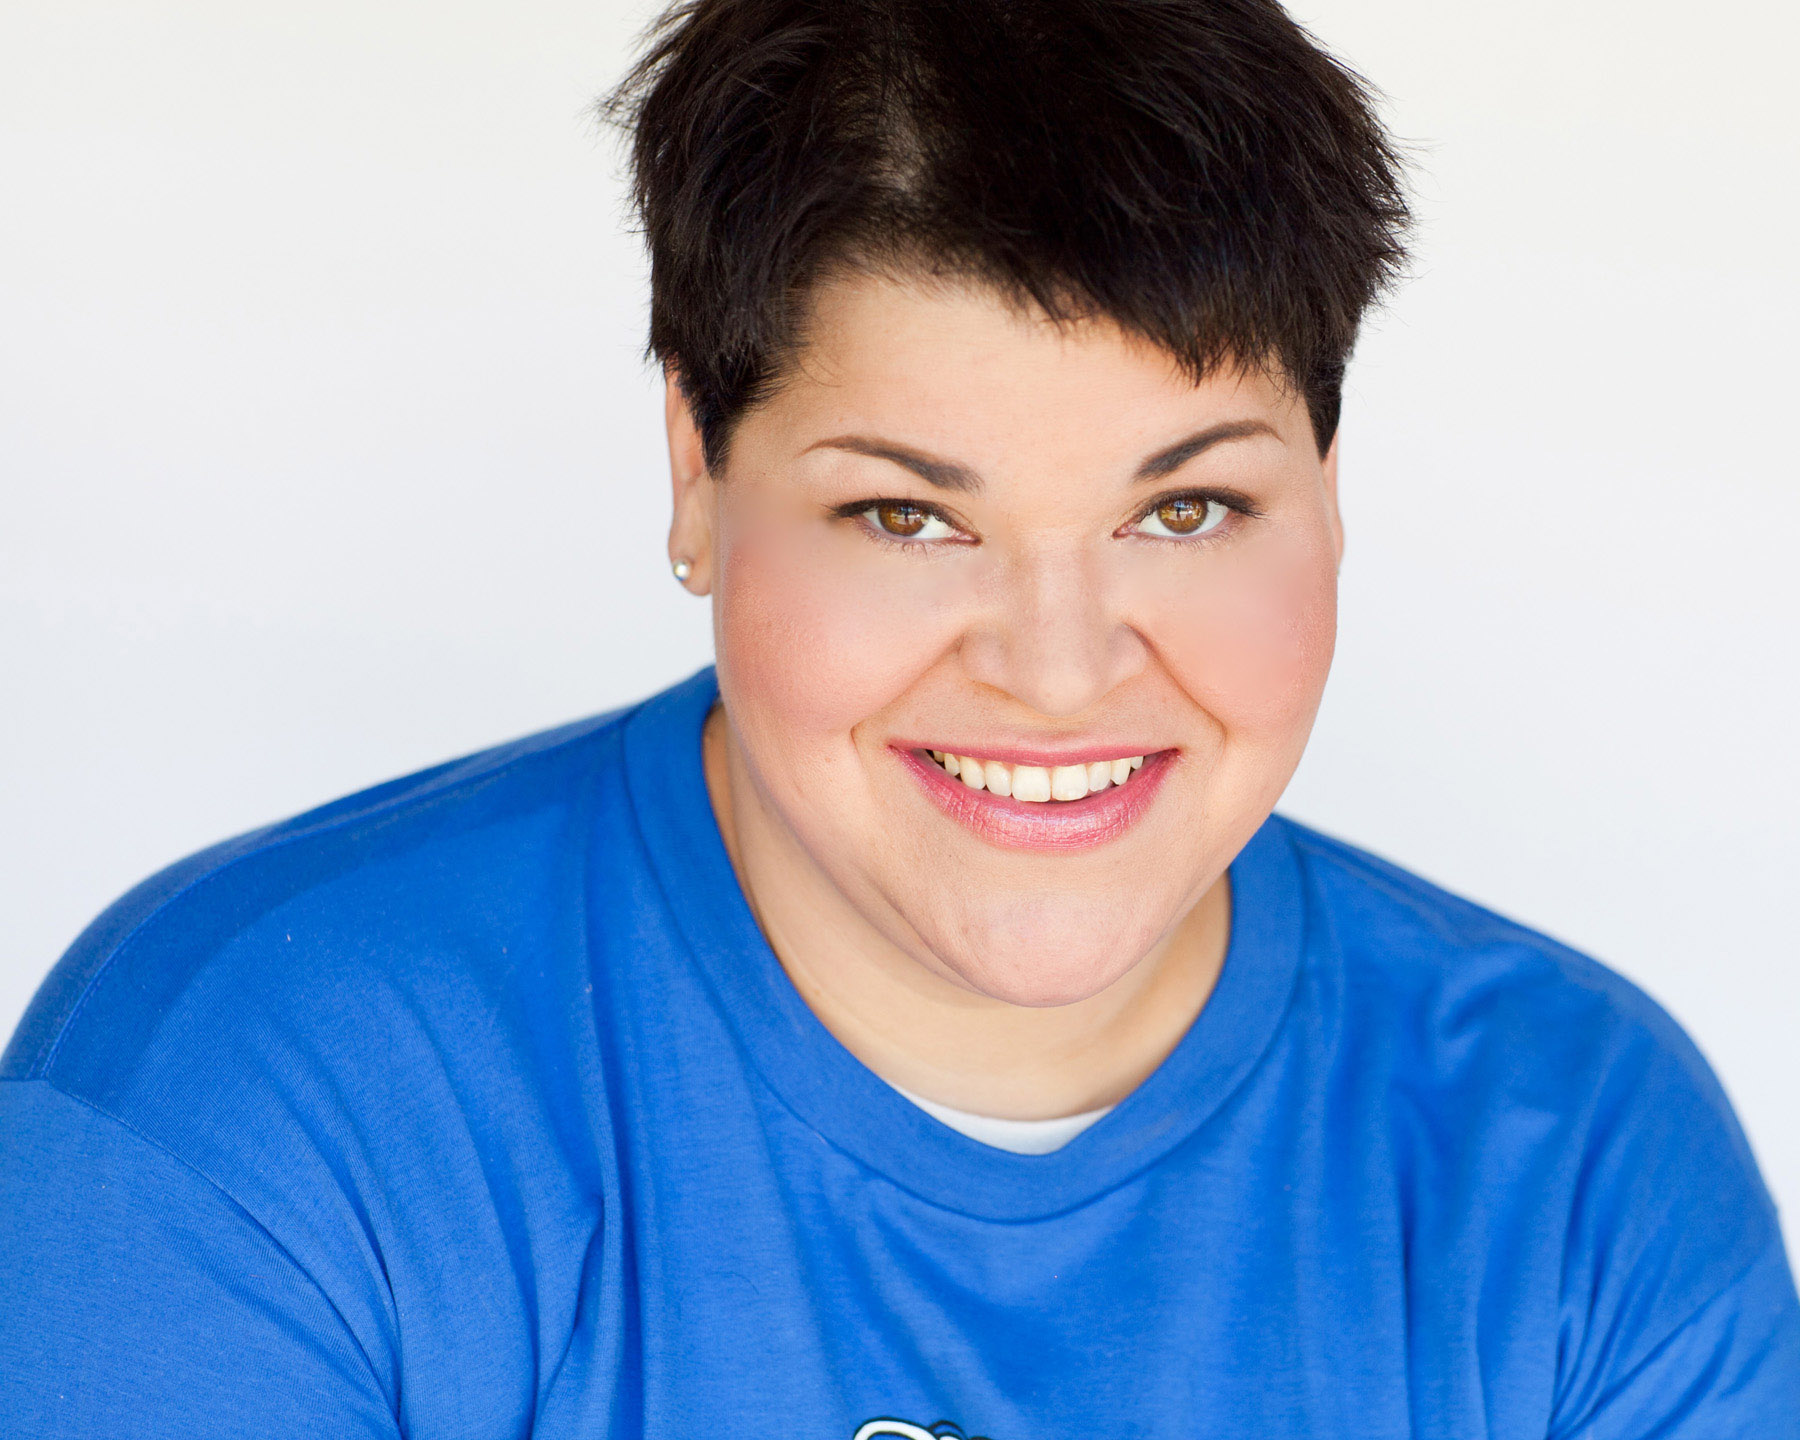 One Night Only! COMEDIAN JEN KOBER TO PLAY CHICAGO Sunday, August 9 at The Den Theatre Benefitting Interrobang Theatre Project 1 Louisiana comedian JEN KOBER will bring her southern brand of down-home comedy to the Windy City for one night only on Sunday, August 9 at 7 pm for an evening benefitting Interrobang Theatre Project at The Den Theatre, 1333 N. Milwaukee Ave. in Chicago. The event will also include live jazz by Louisiana native Zakk Garner, food, a cash bar and raffle. Tickets are currently available at www.interrobangtheatre.org.